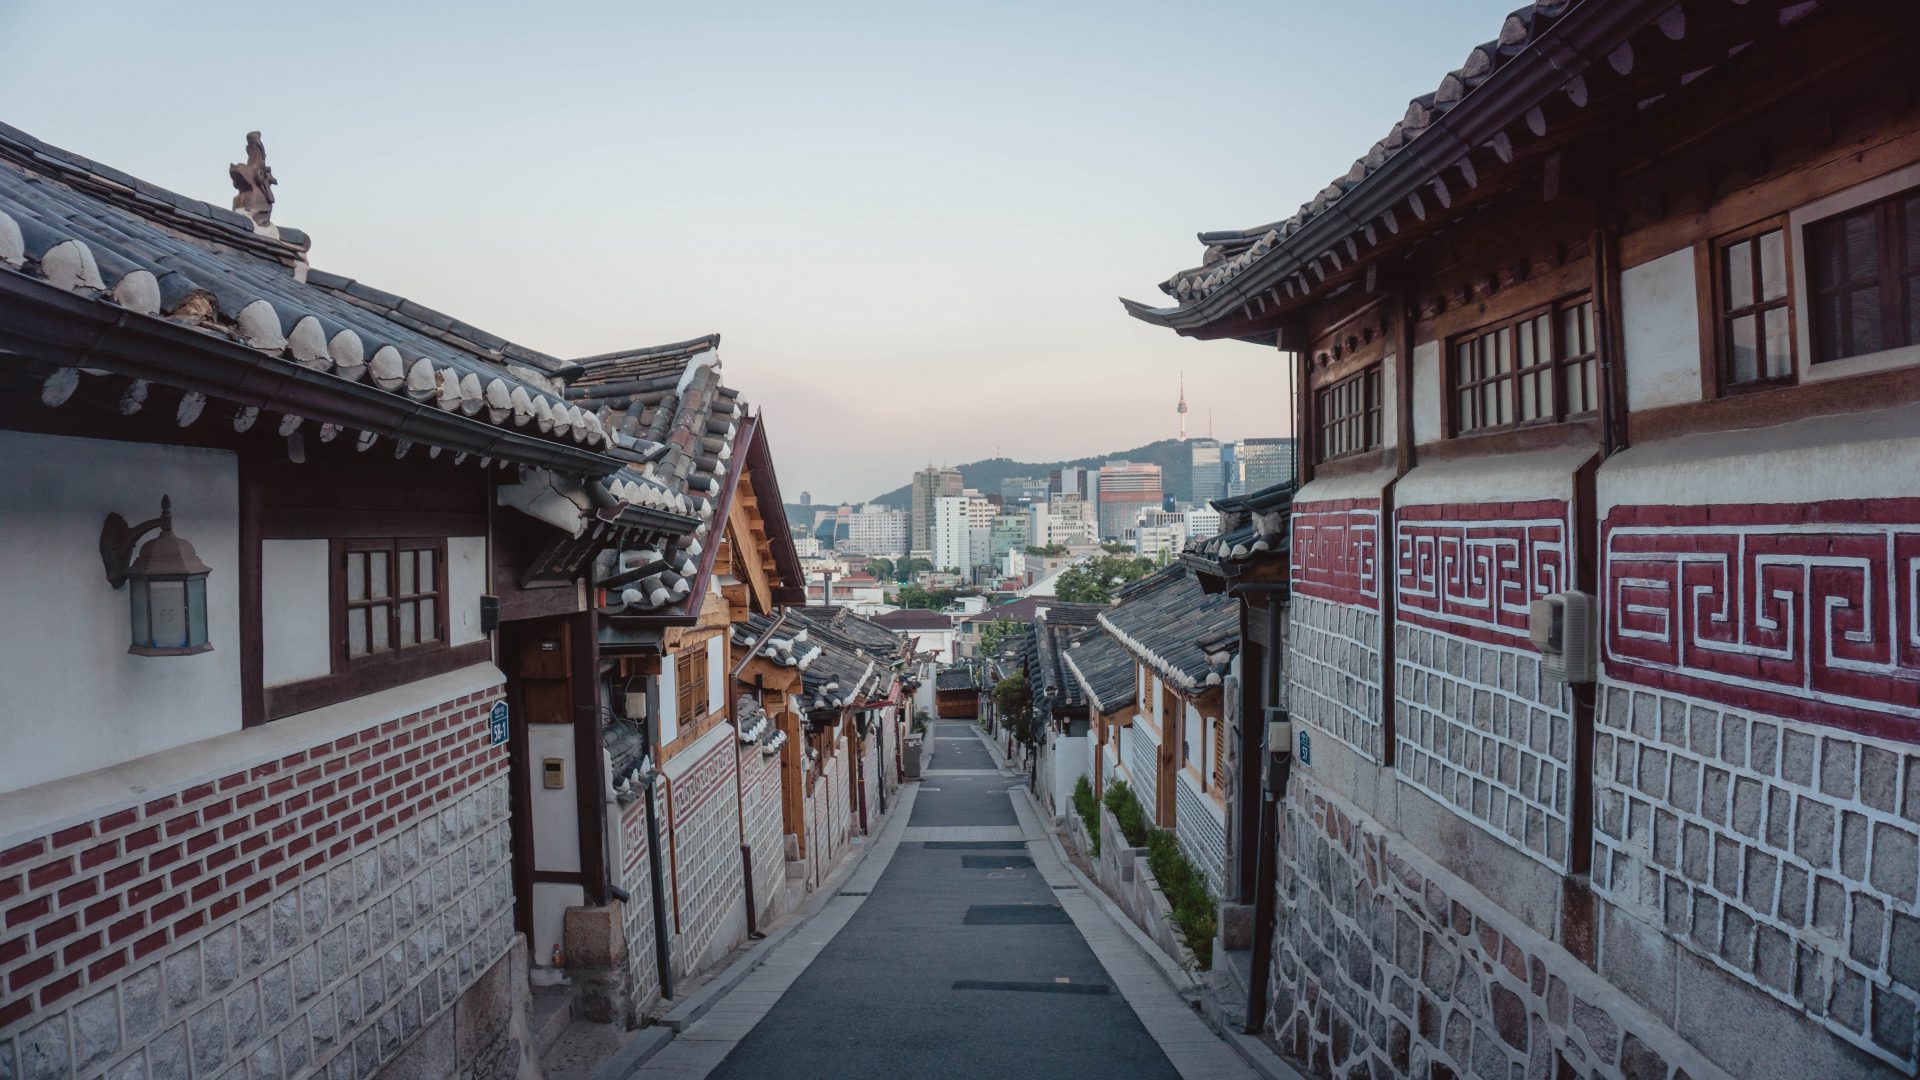 The most photographed street in the Hanok village of Seoul called Bukchon